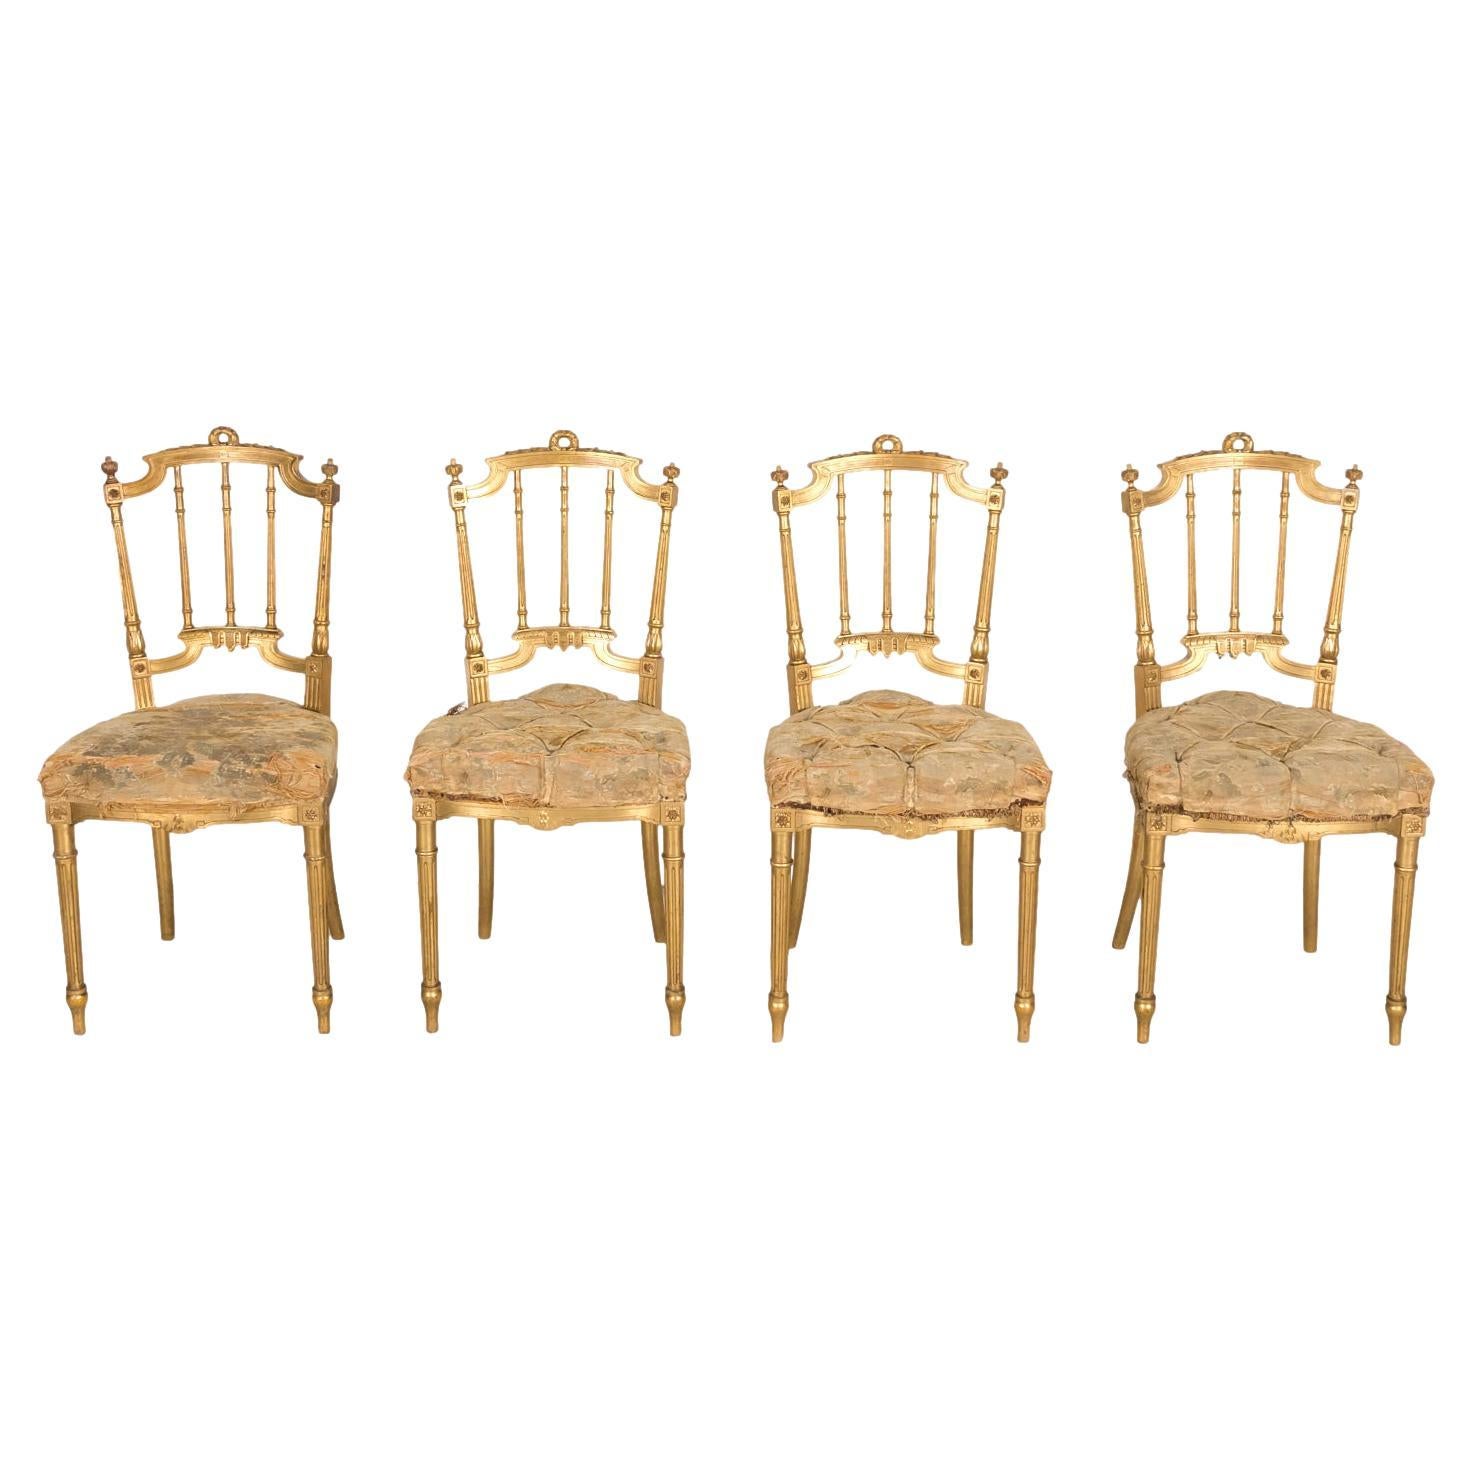  19th Century French Louis XVI Style Neoclassical Gilded Opera Chairs, 4 Avail For Sale